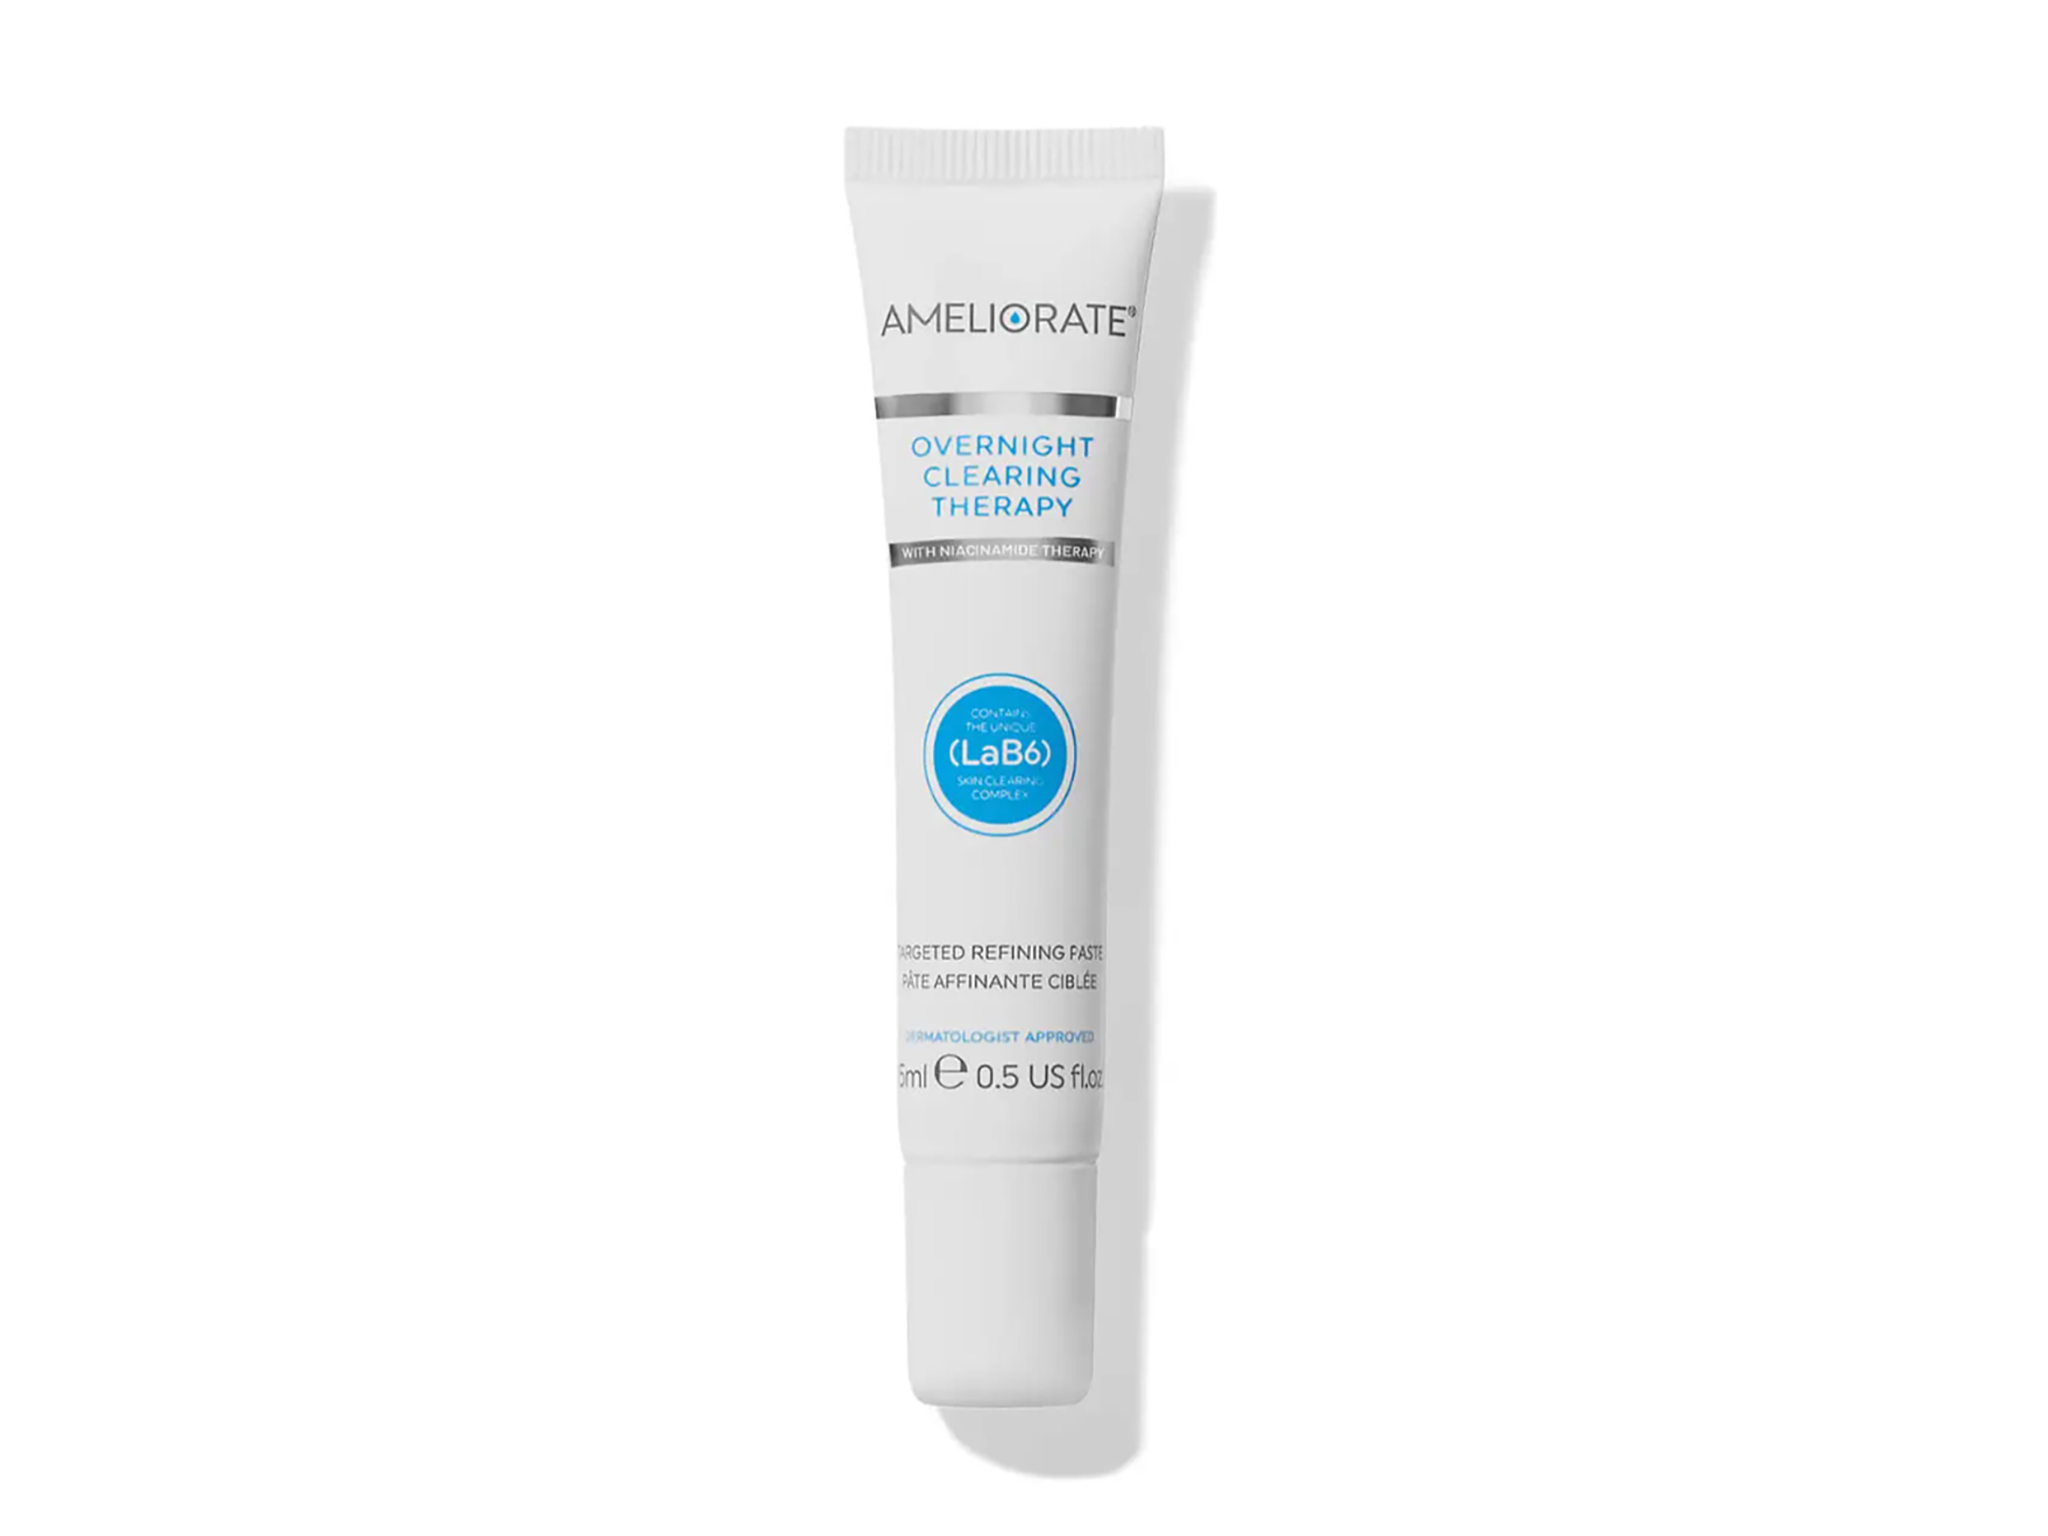 Ameliorate blemish overnight clearing therapy.png